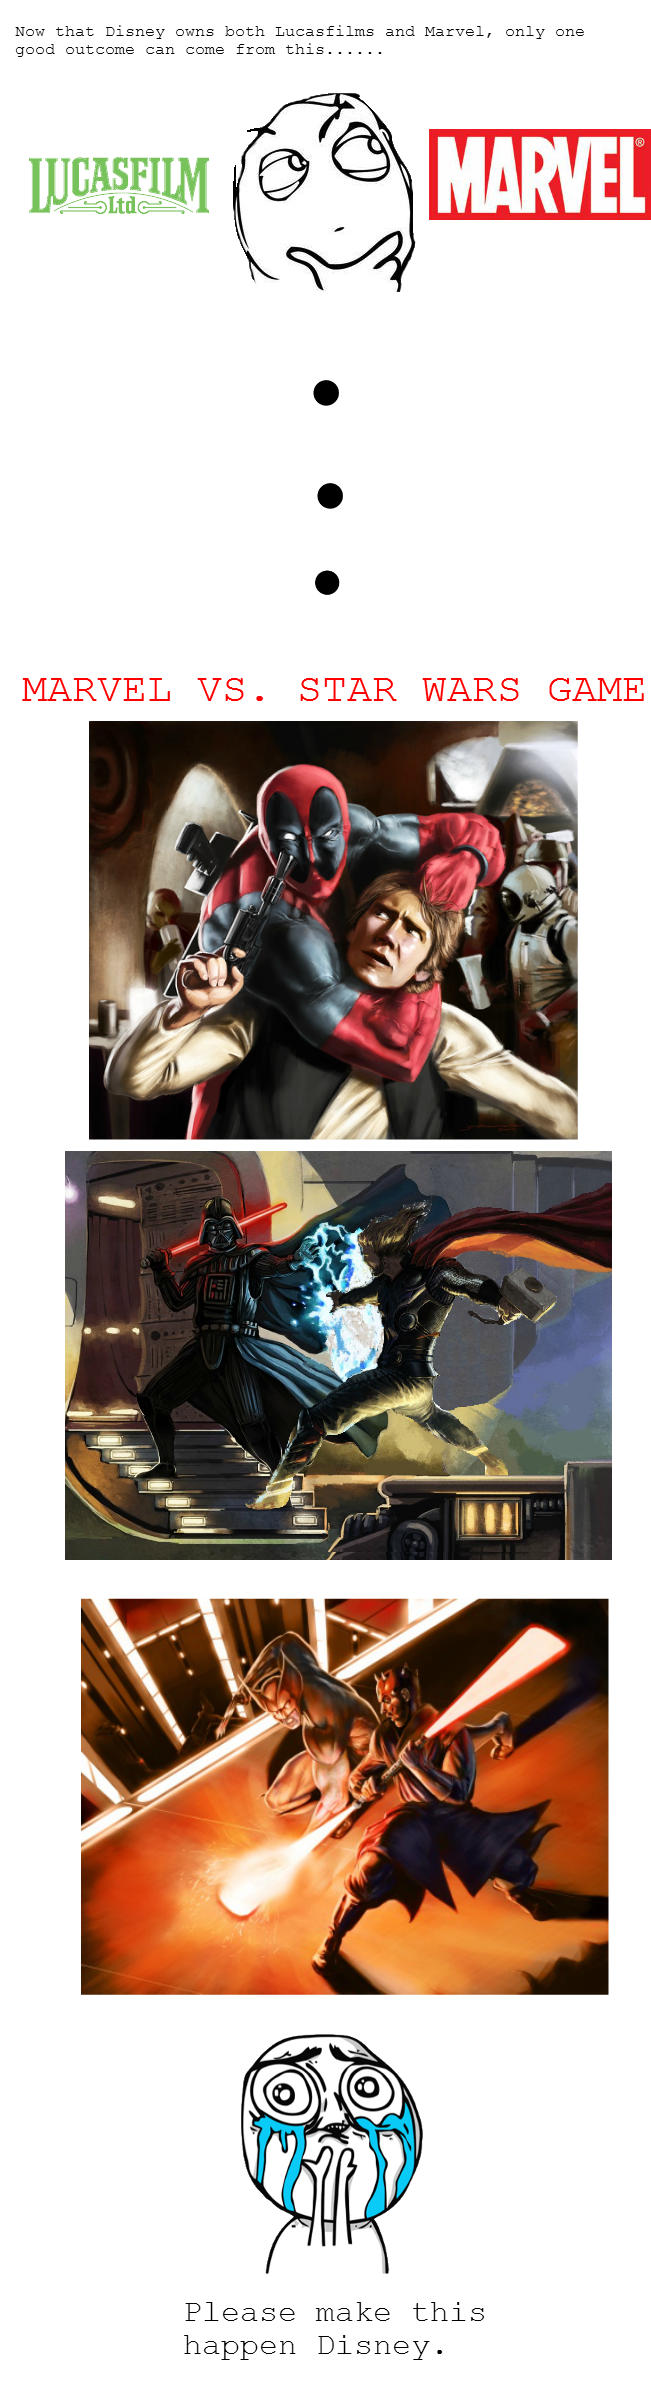 Marvel+vs.+Star+Wars.+This+could+be+the+greatest+invention_aa6605_4204795.png